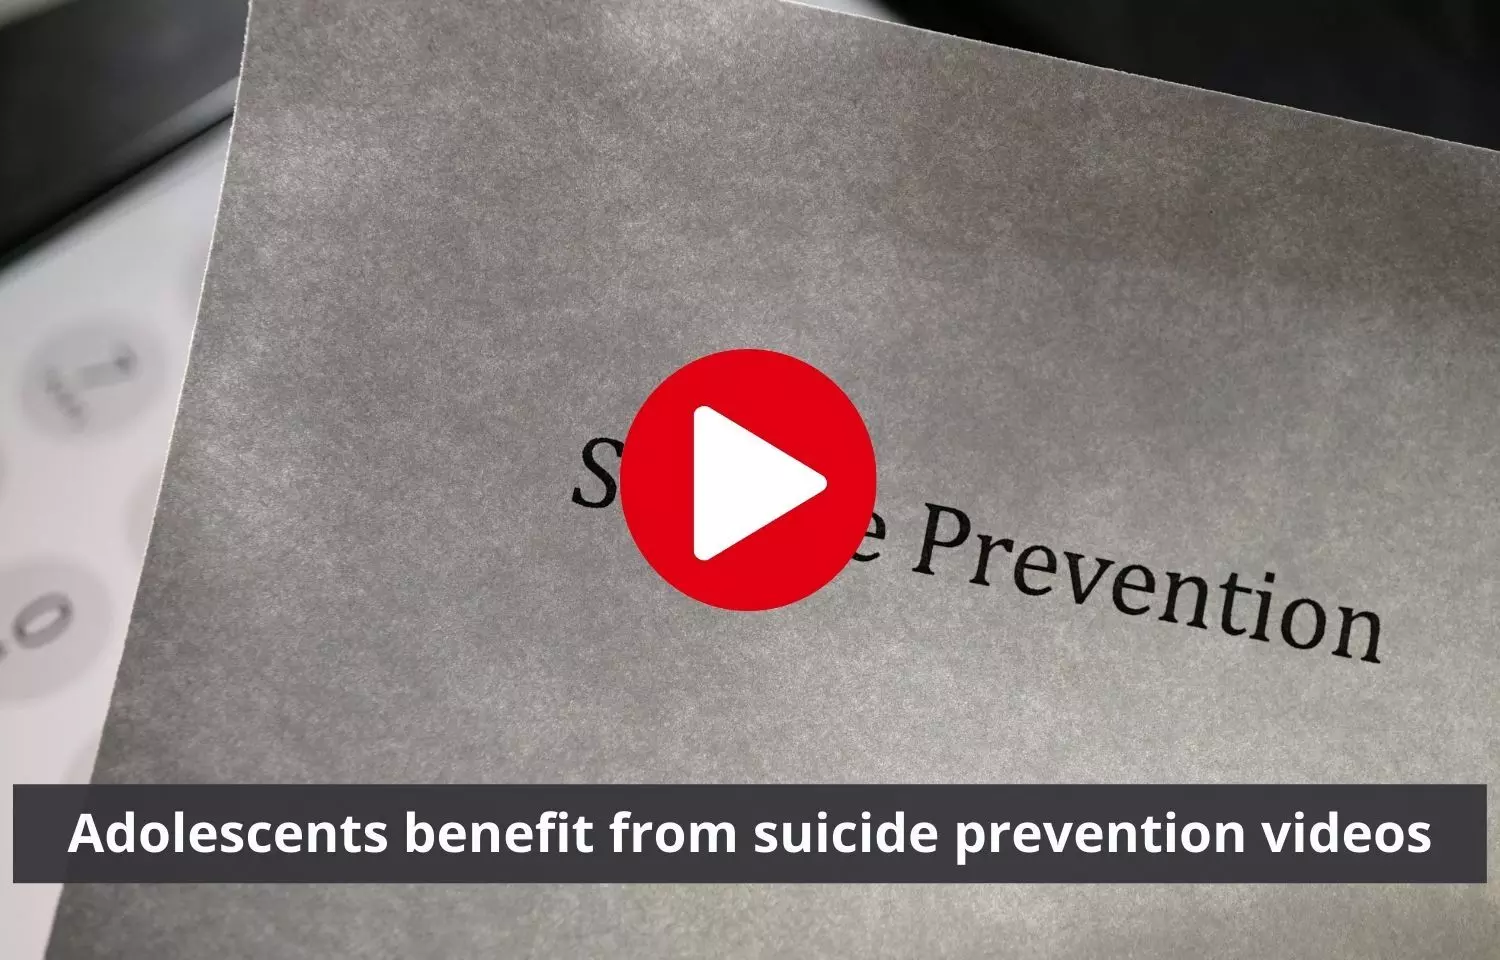 Suicide prevention videos can benefit adolescents, says study